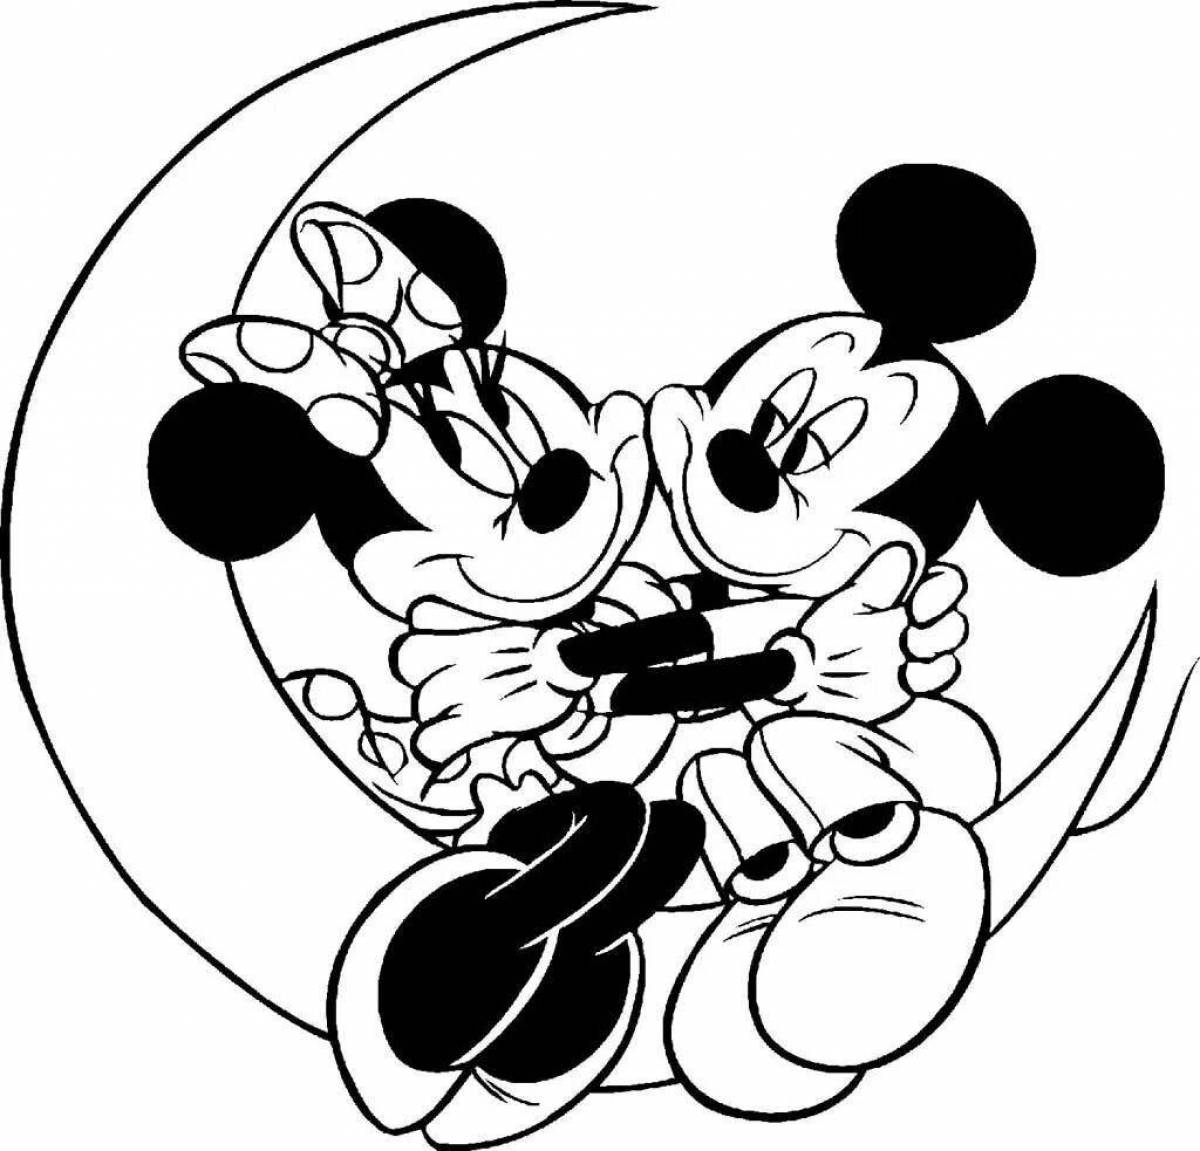 Dazzling mickey mouse coloring book